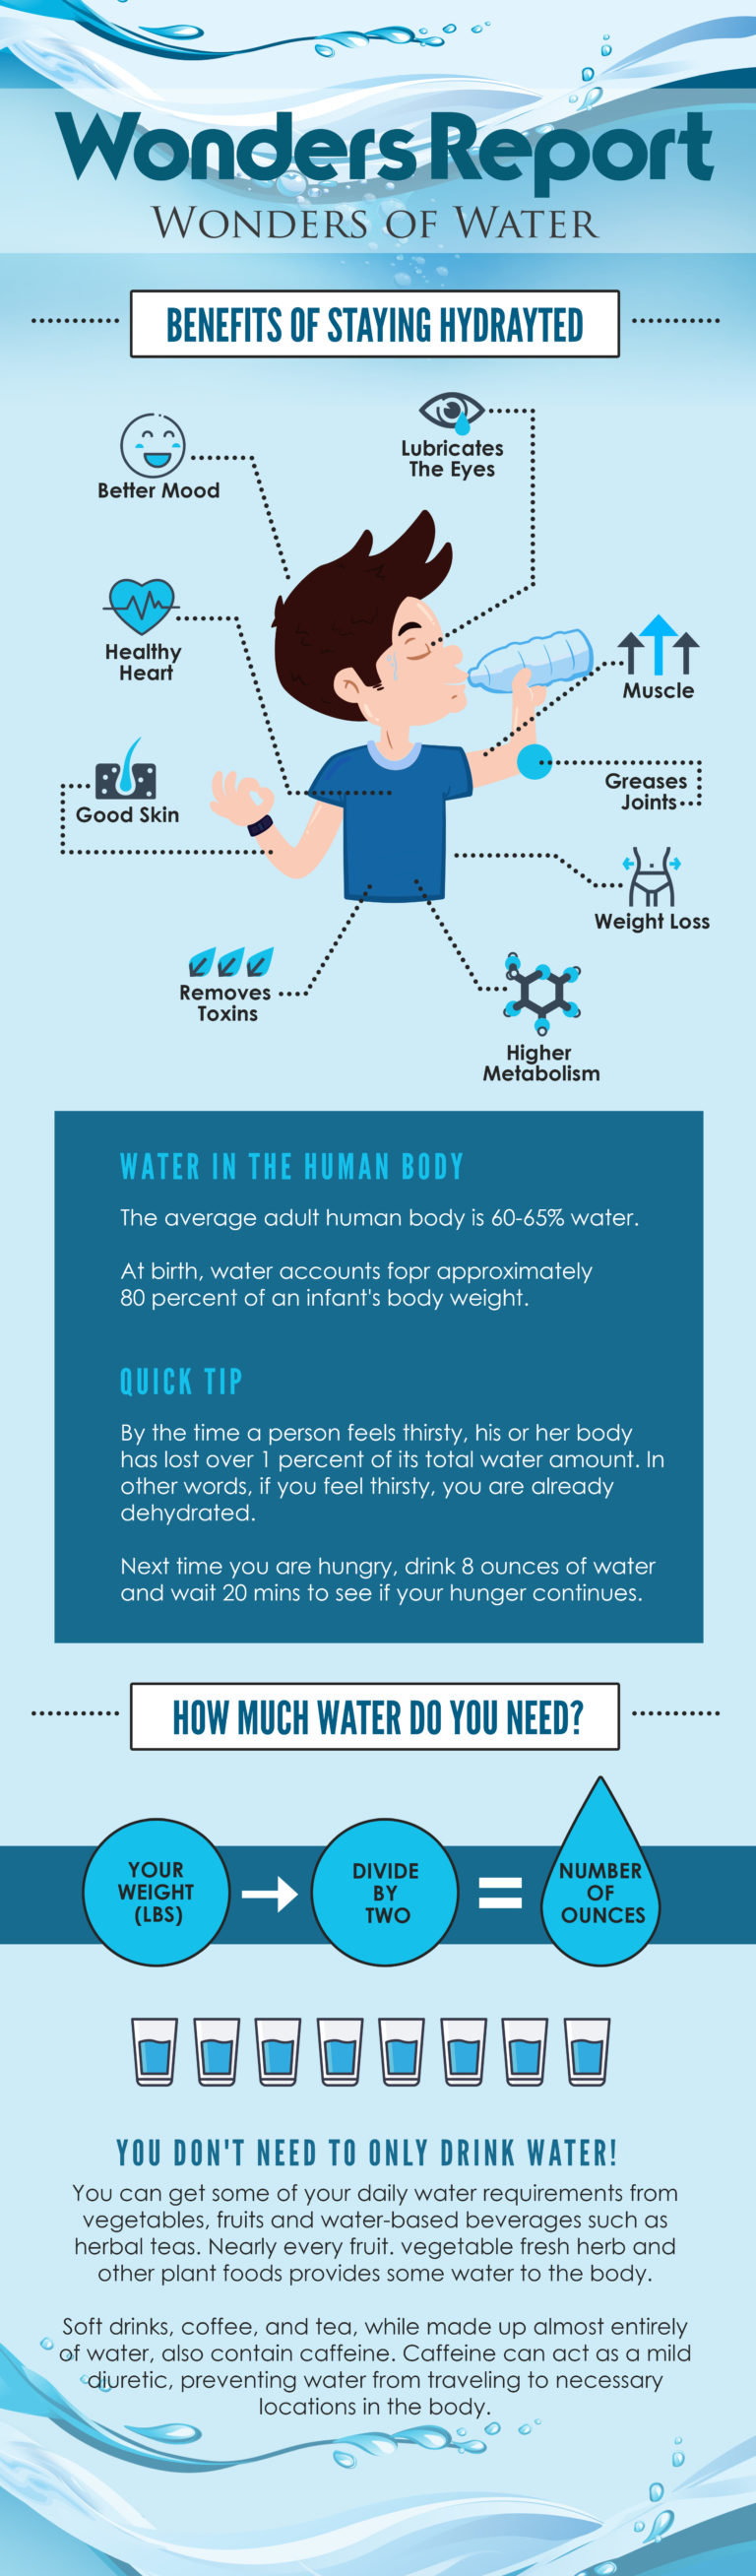 Benefits Of Staying Hydrated